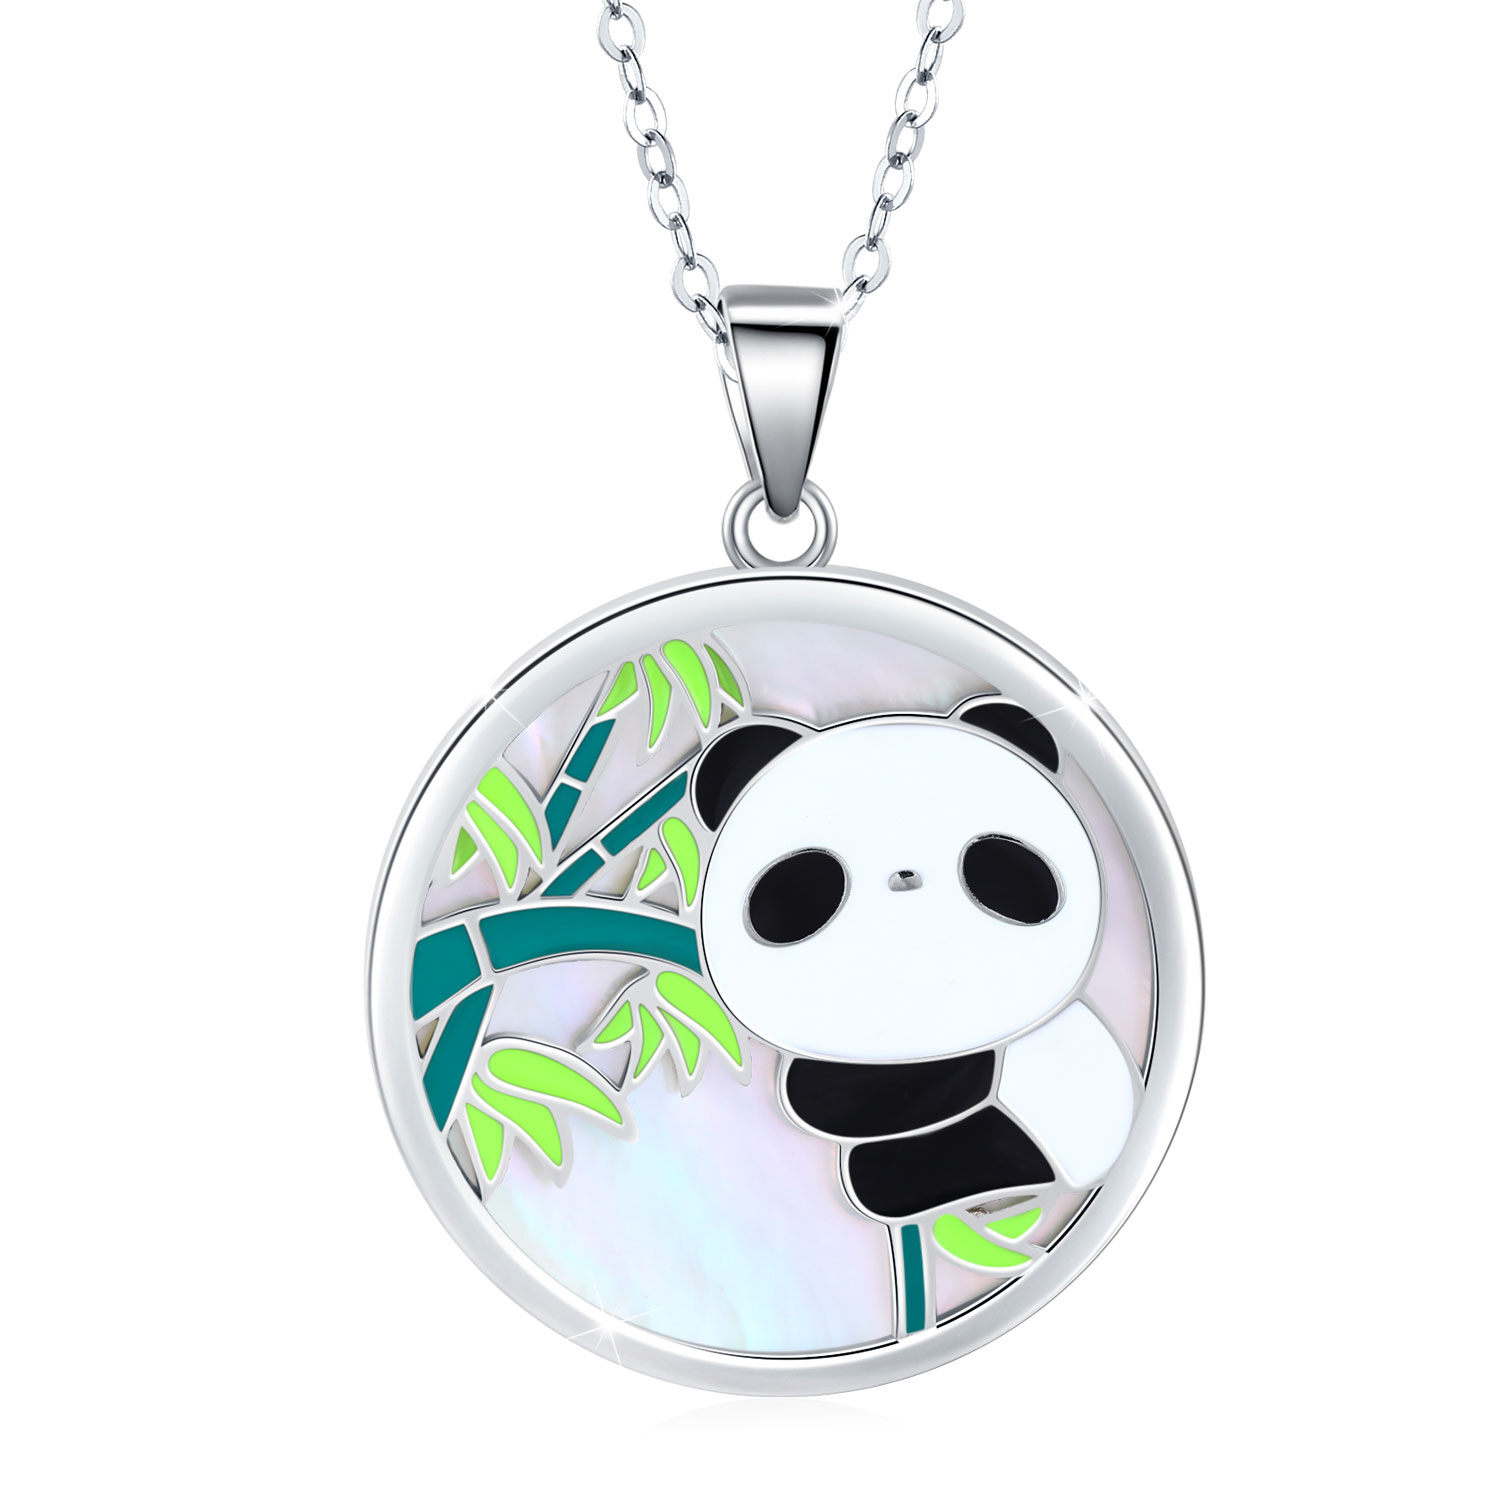 Panda Locket Necklace 925 Sterling Silver That Holds Pictures Memorial Pendant Photo Necklace Jewelry Gifts for Women Girls 